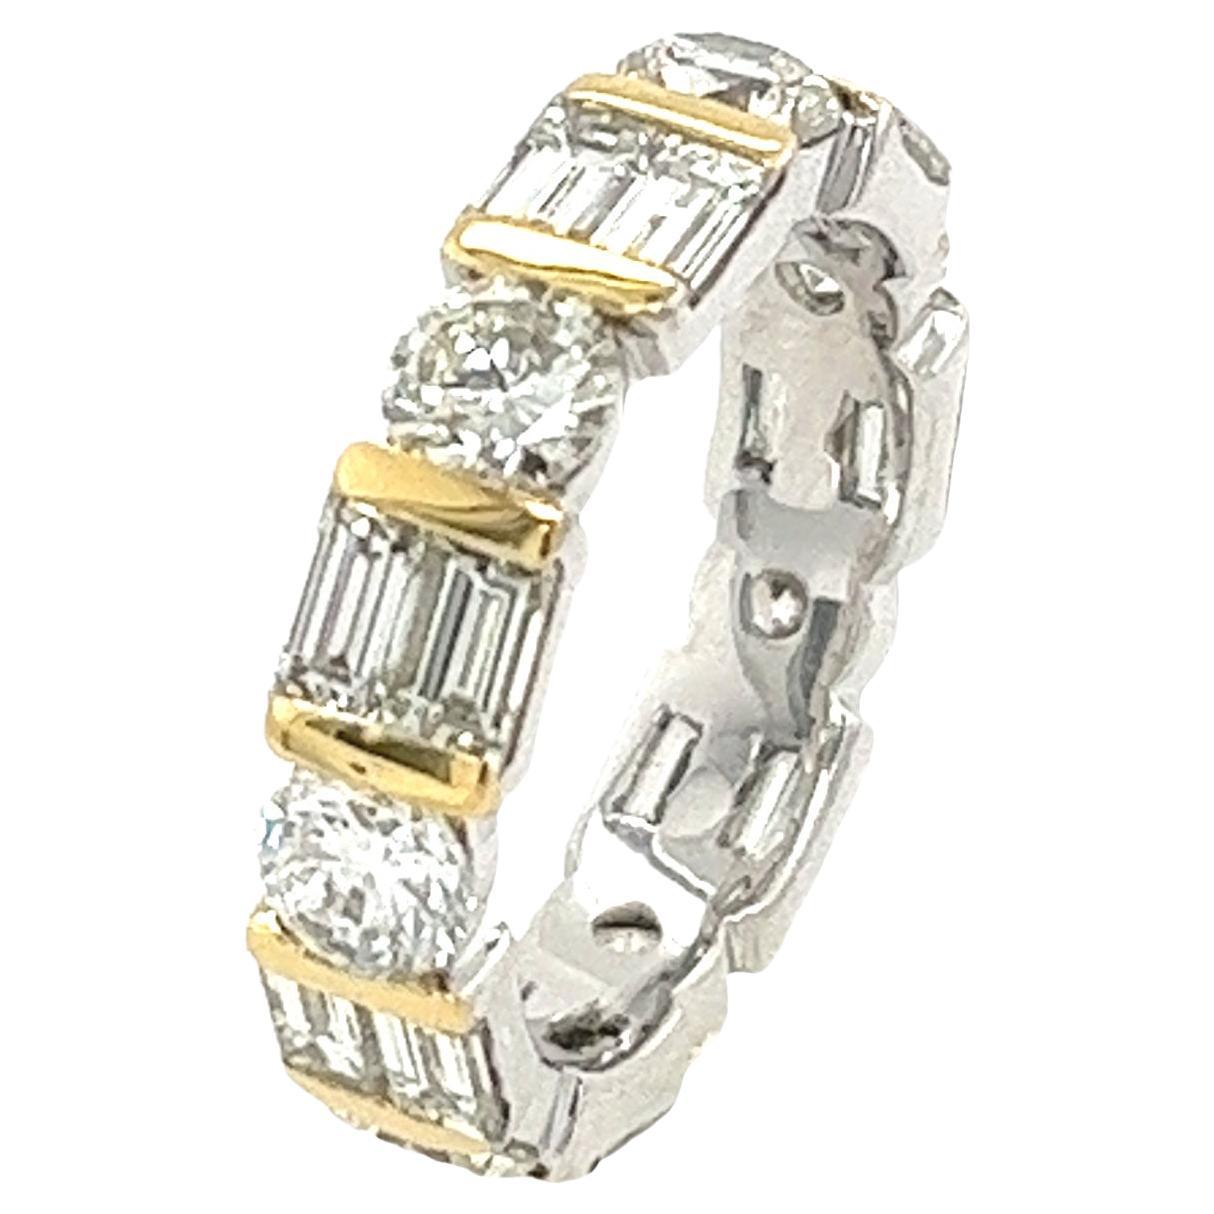 14ct White &Yellow Gold Diamond Full eternity ring set with 7 Round &14 baguette